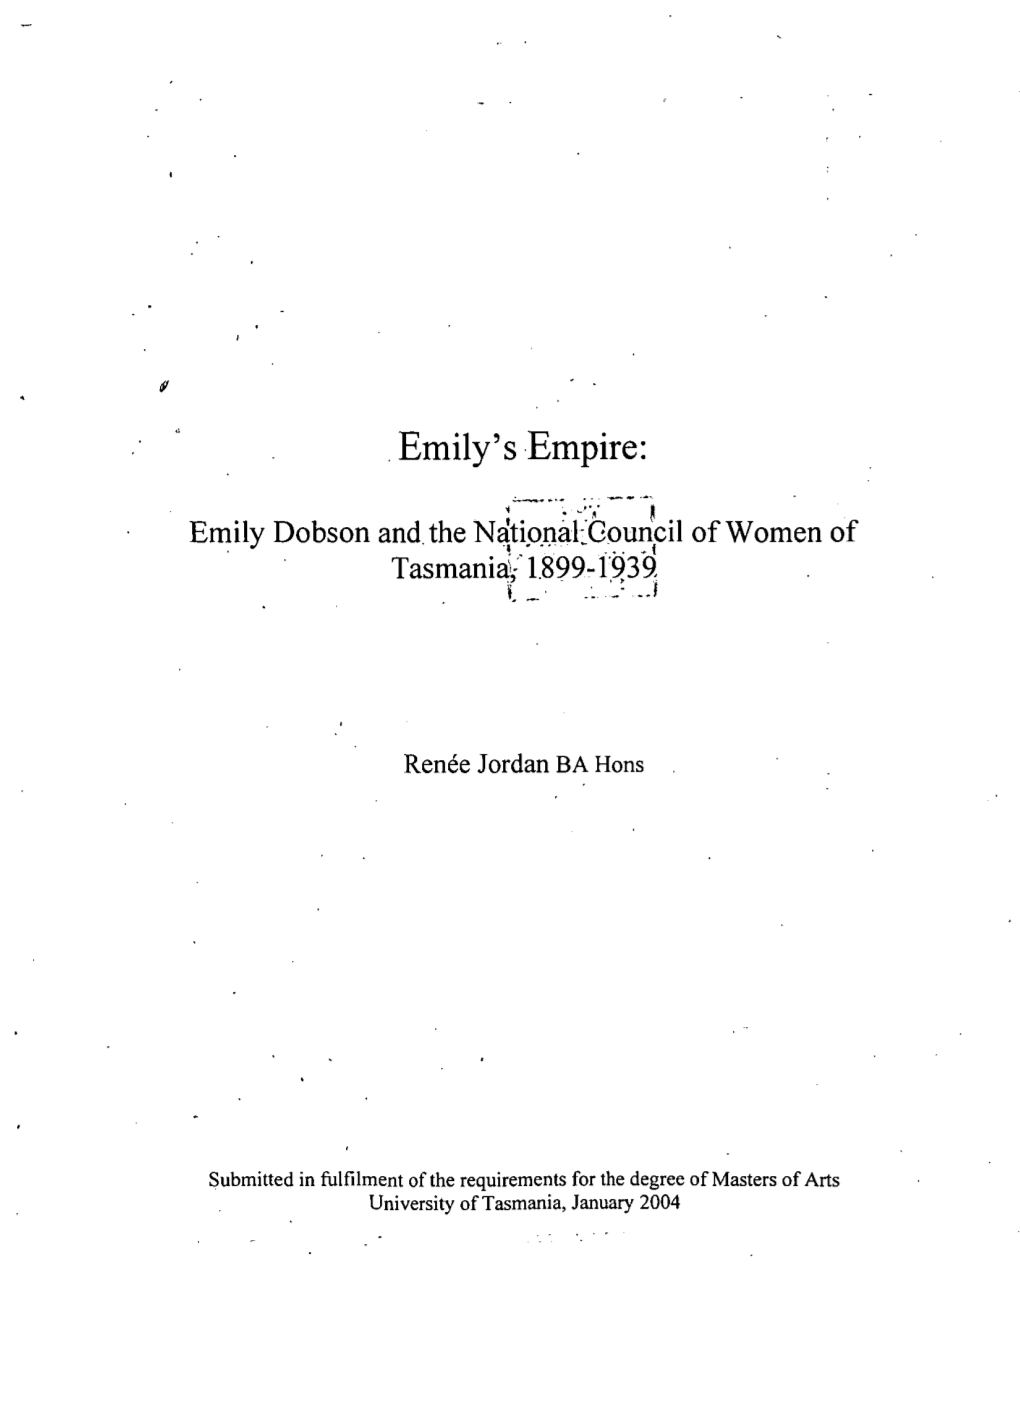 Emily Dobson and the National Council of Women of Tasmania